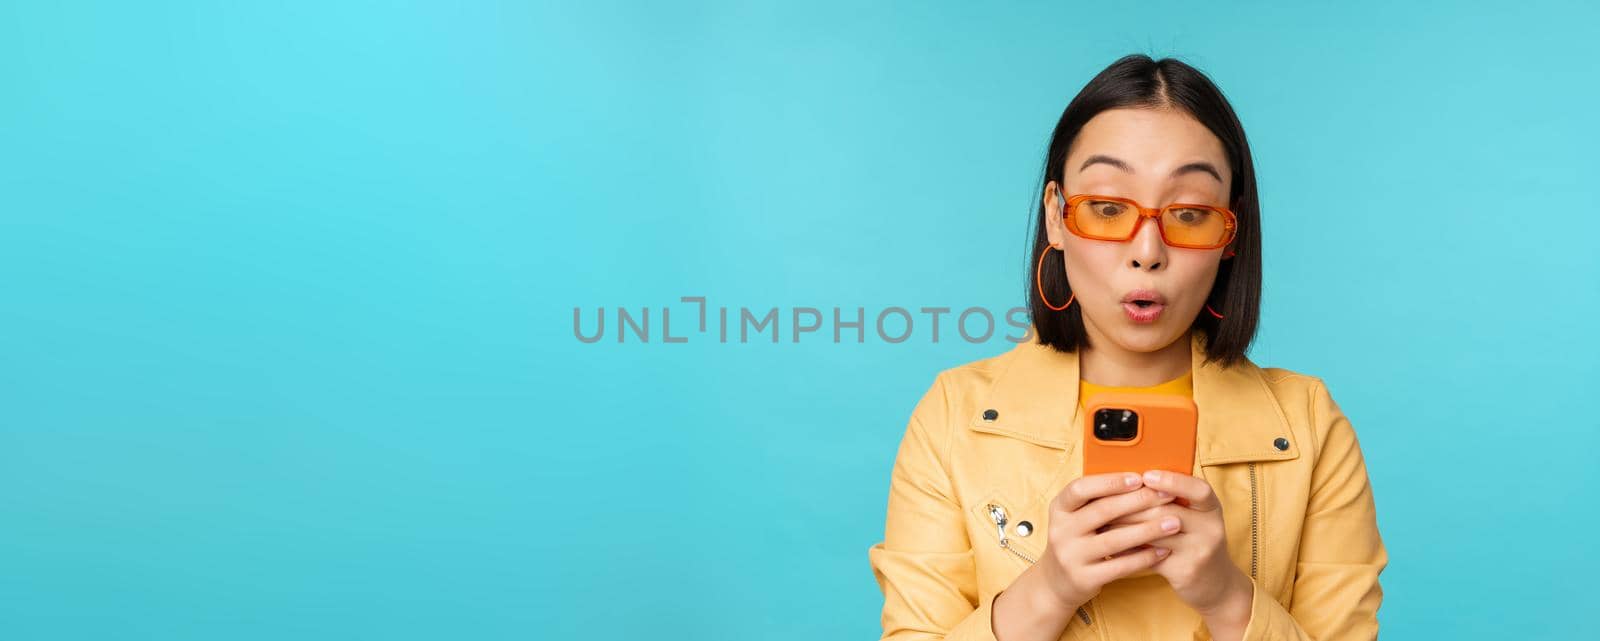 Portrait of asian woman in sunglasses, looking at mobile phone with surprised face expression, standing over blue background by Benzoix